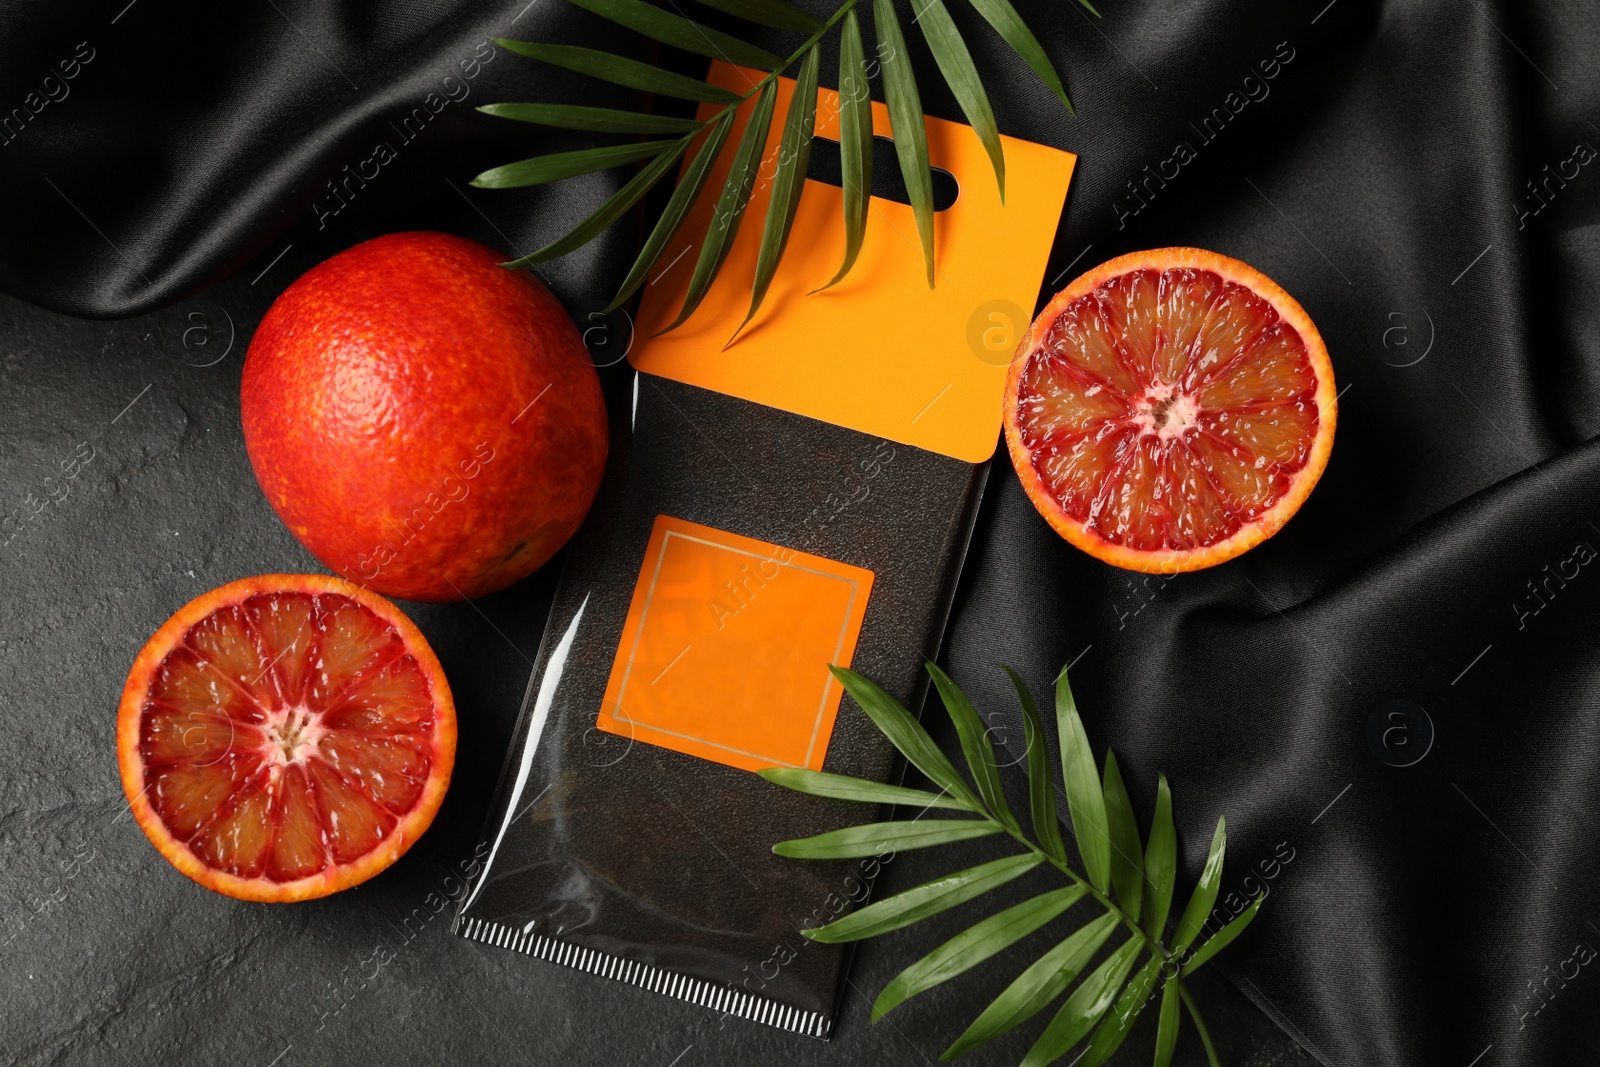 Photo of Scented sachet, red oranges and leaves on black table, flat lay